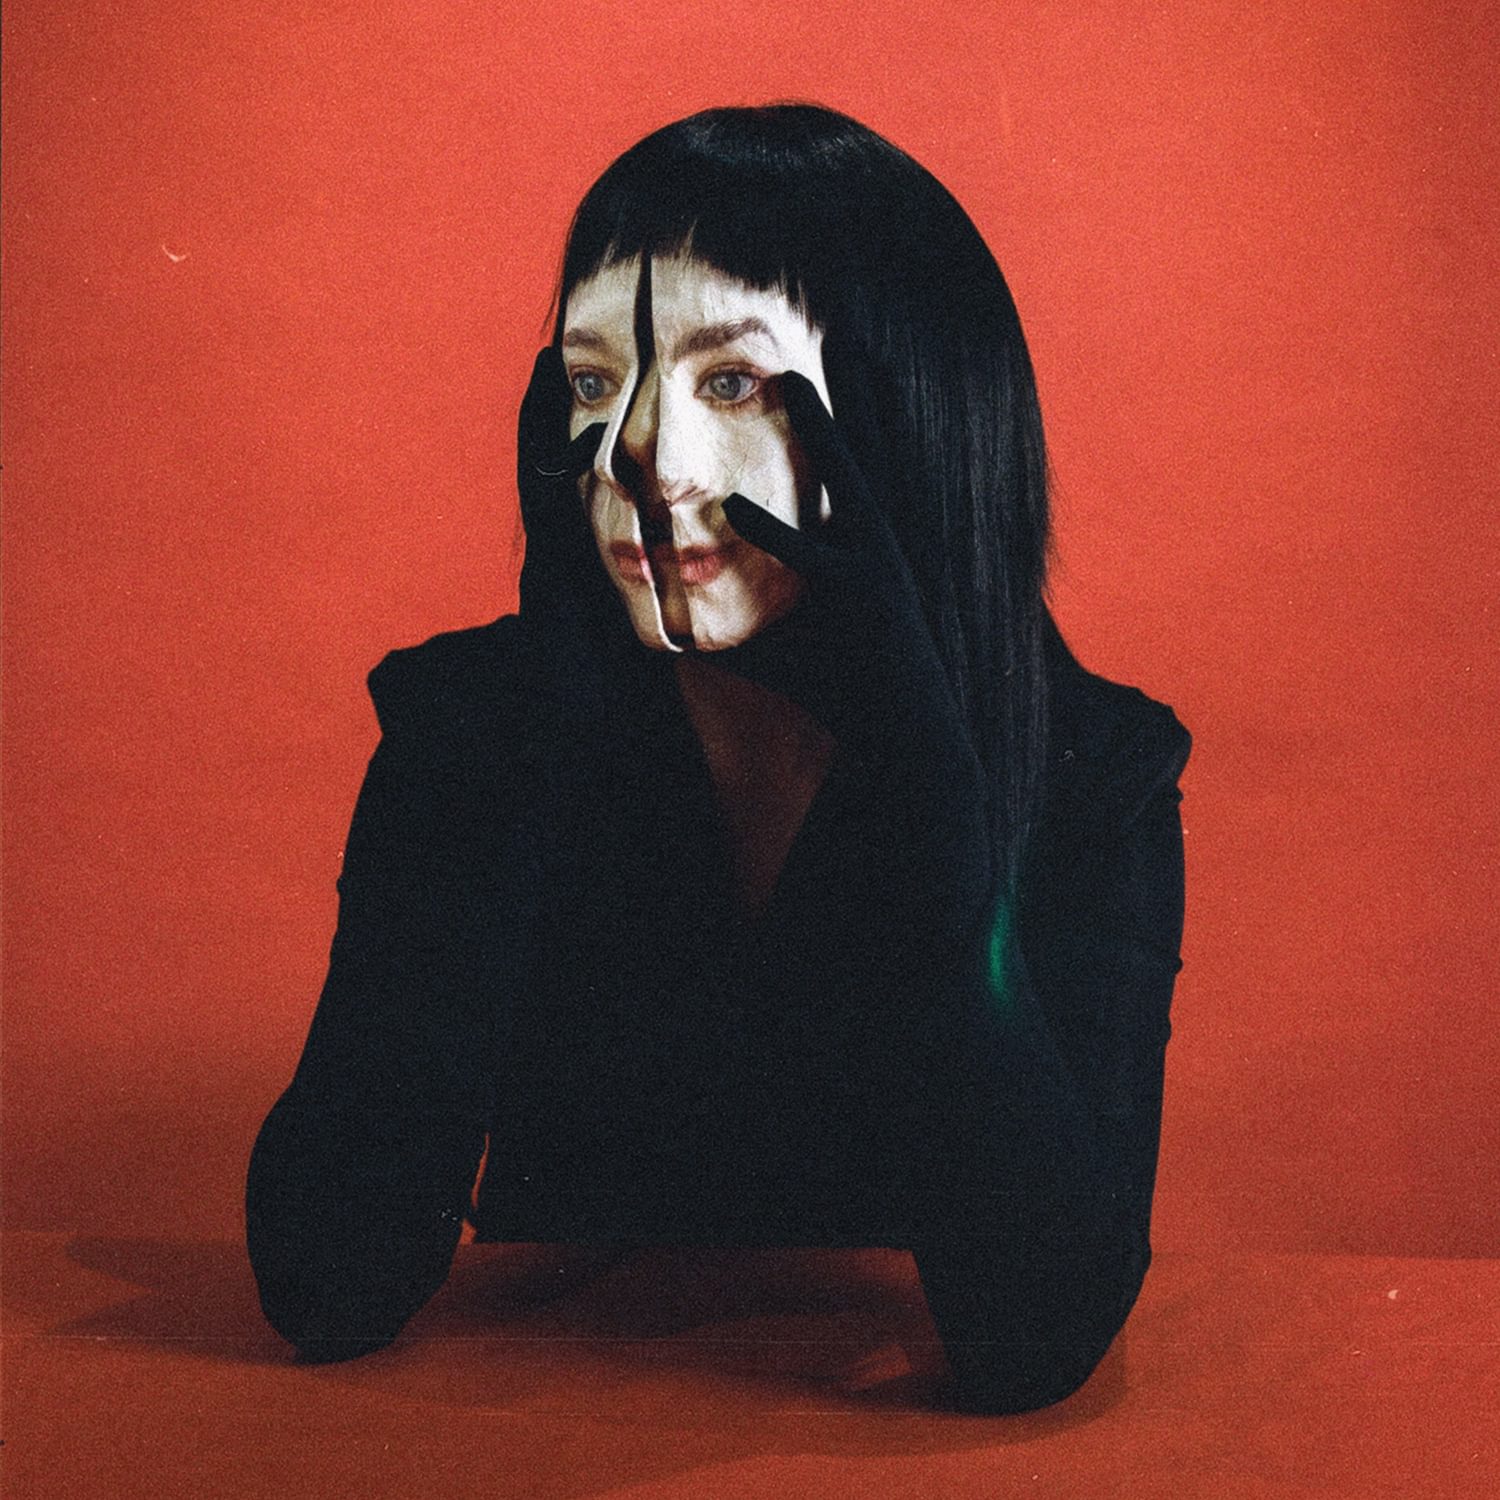 <p><strong>Allie X</strong> - Girl With No Face</p>